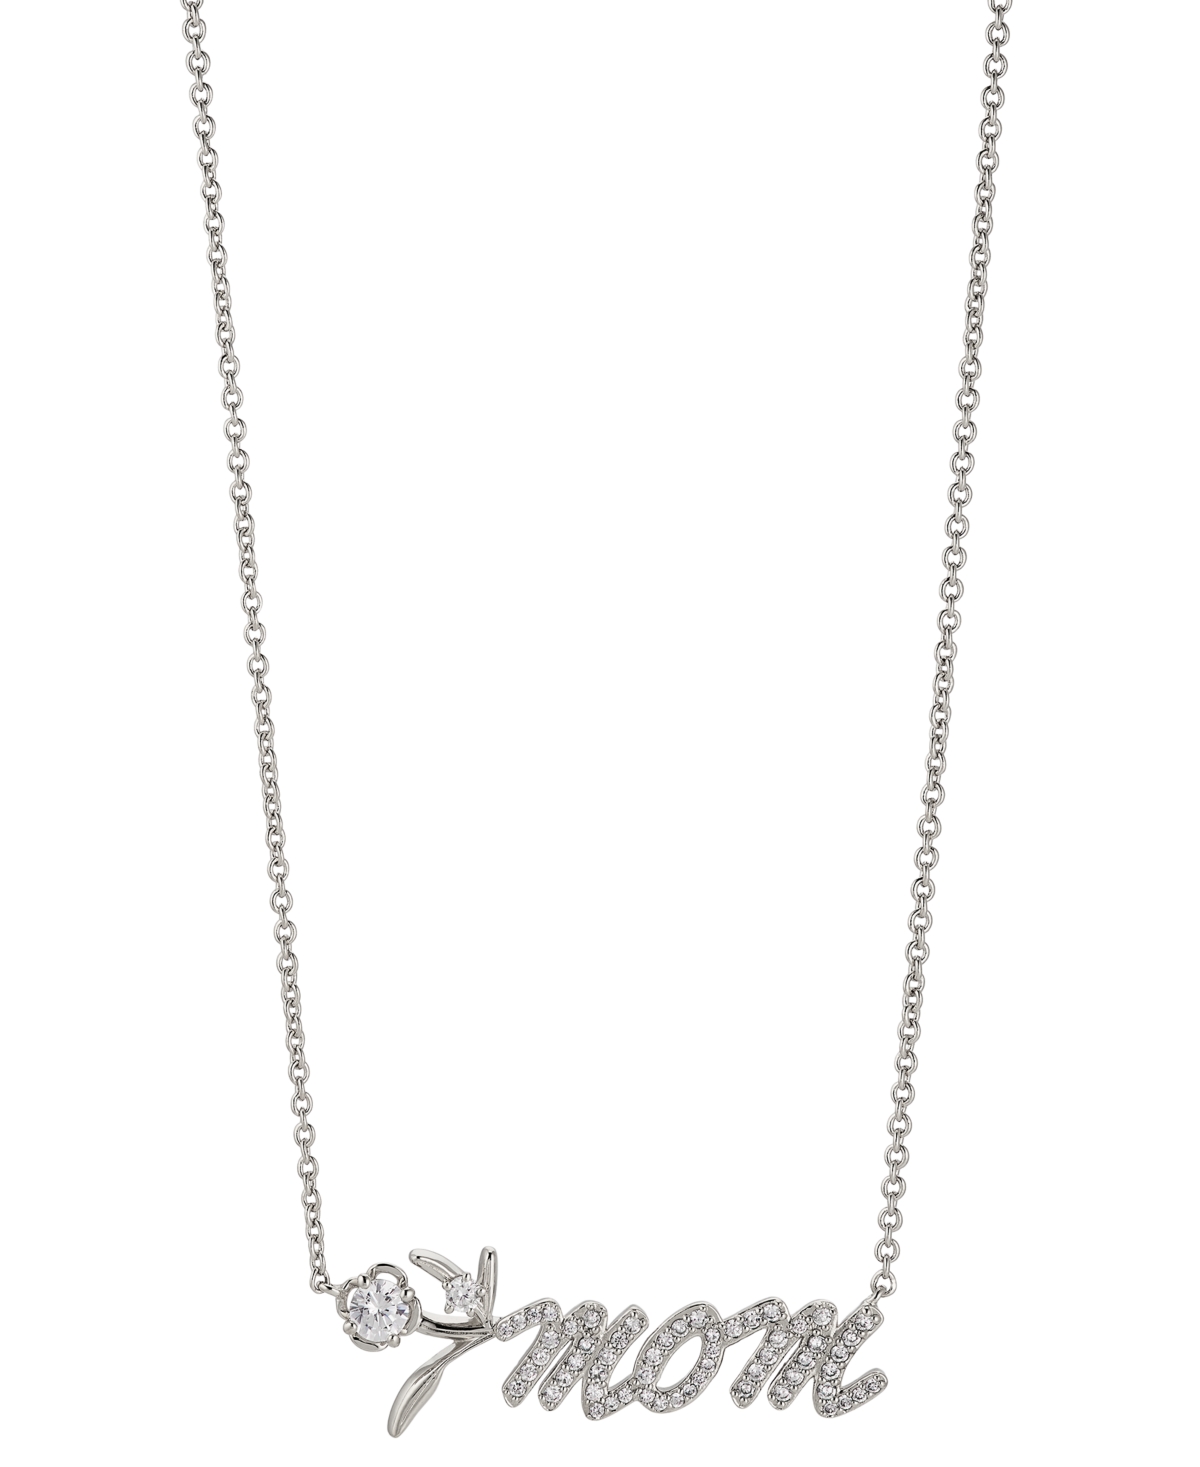 Shop Eliot Danori Rhodium-plated Cubic Zirconia Mom Blossoms Pendant Necklace, 16" + 2" Extender, Created For Macy's